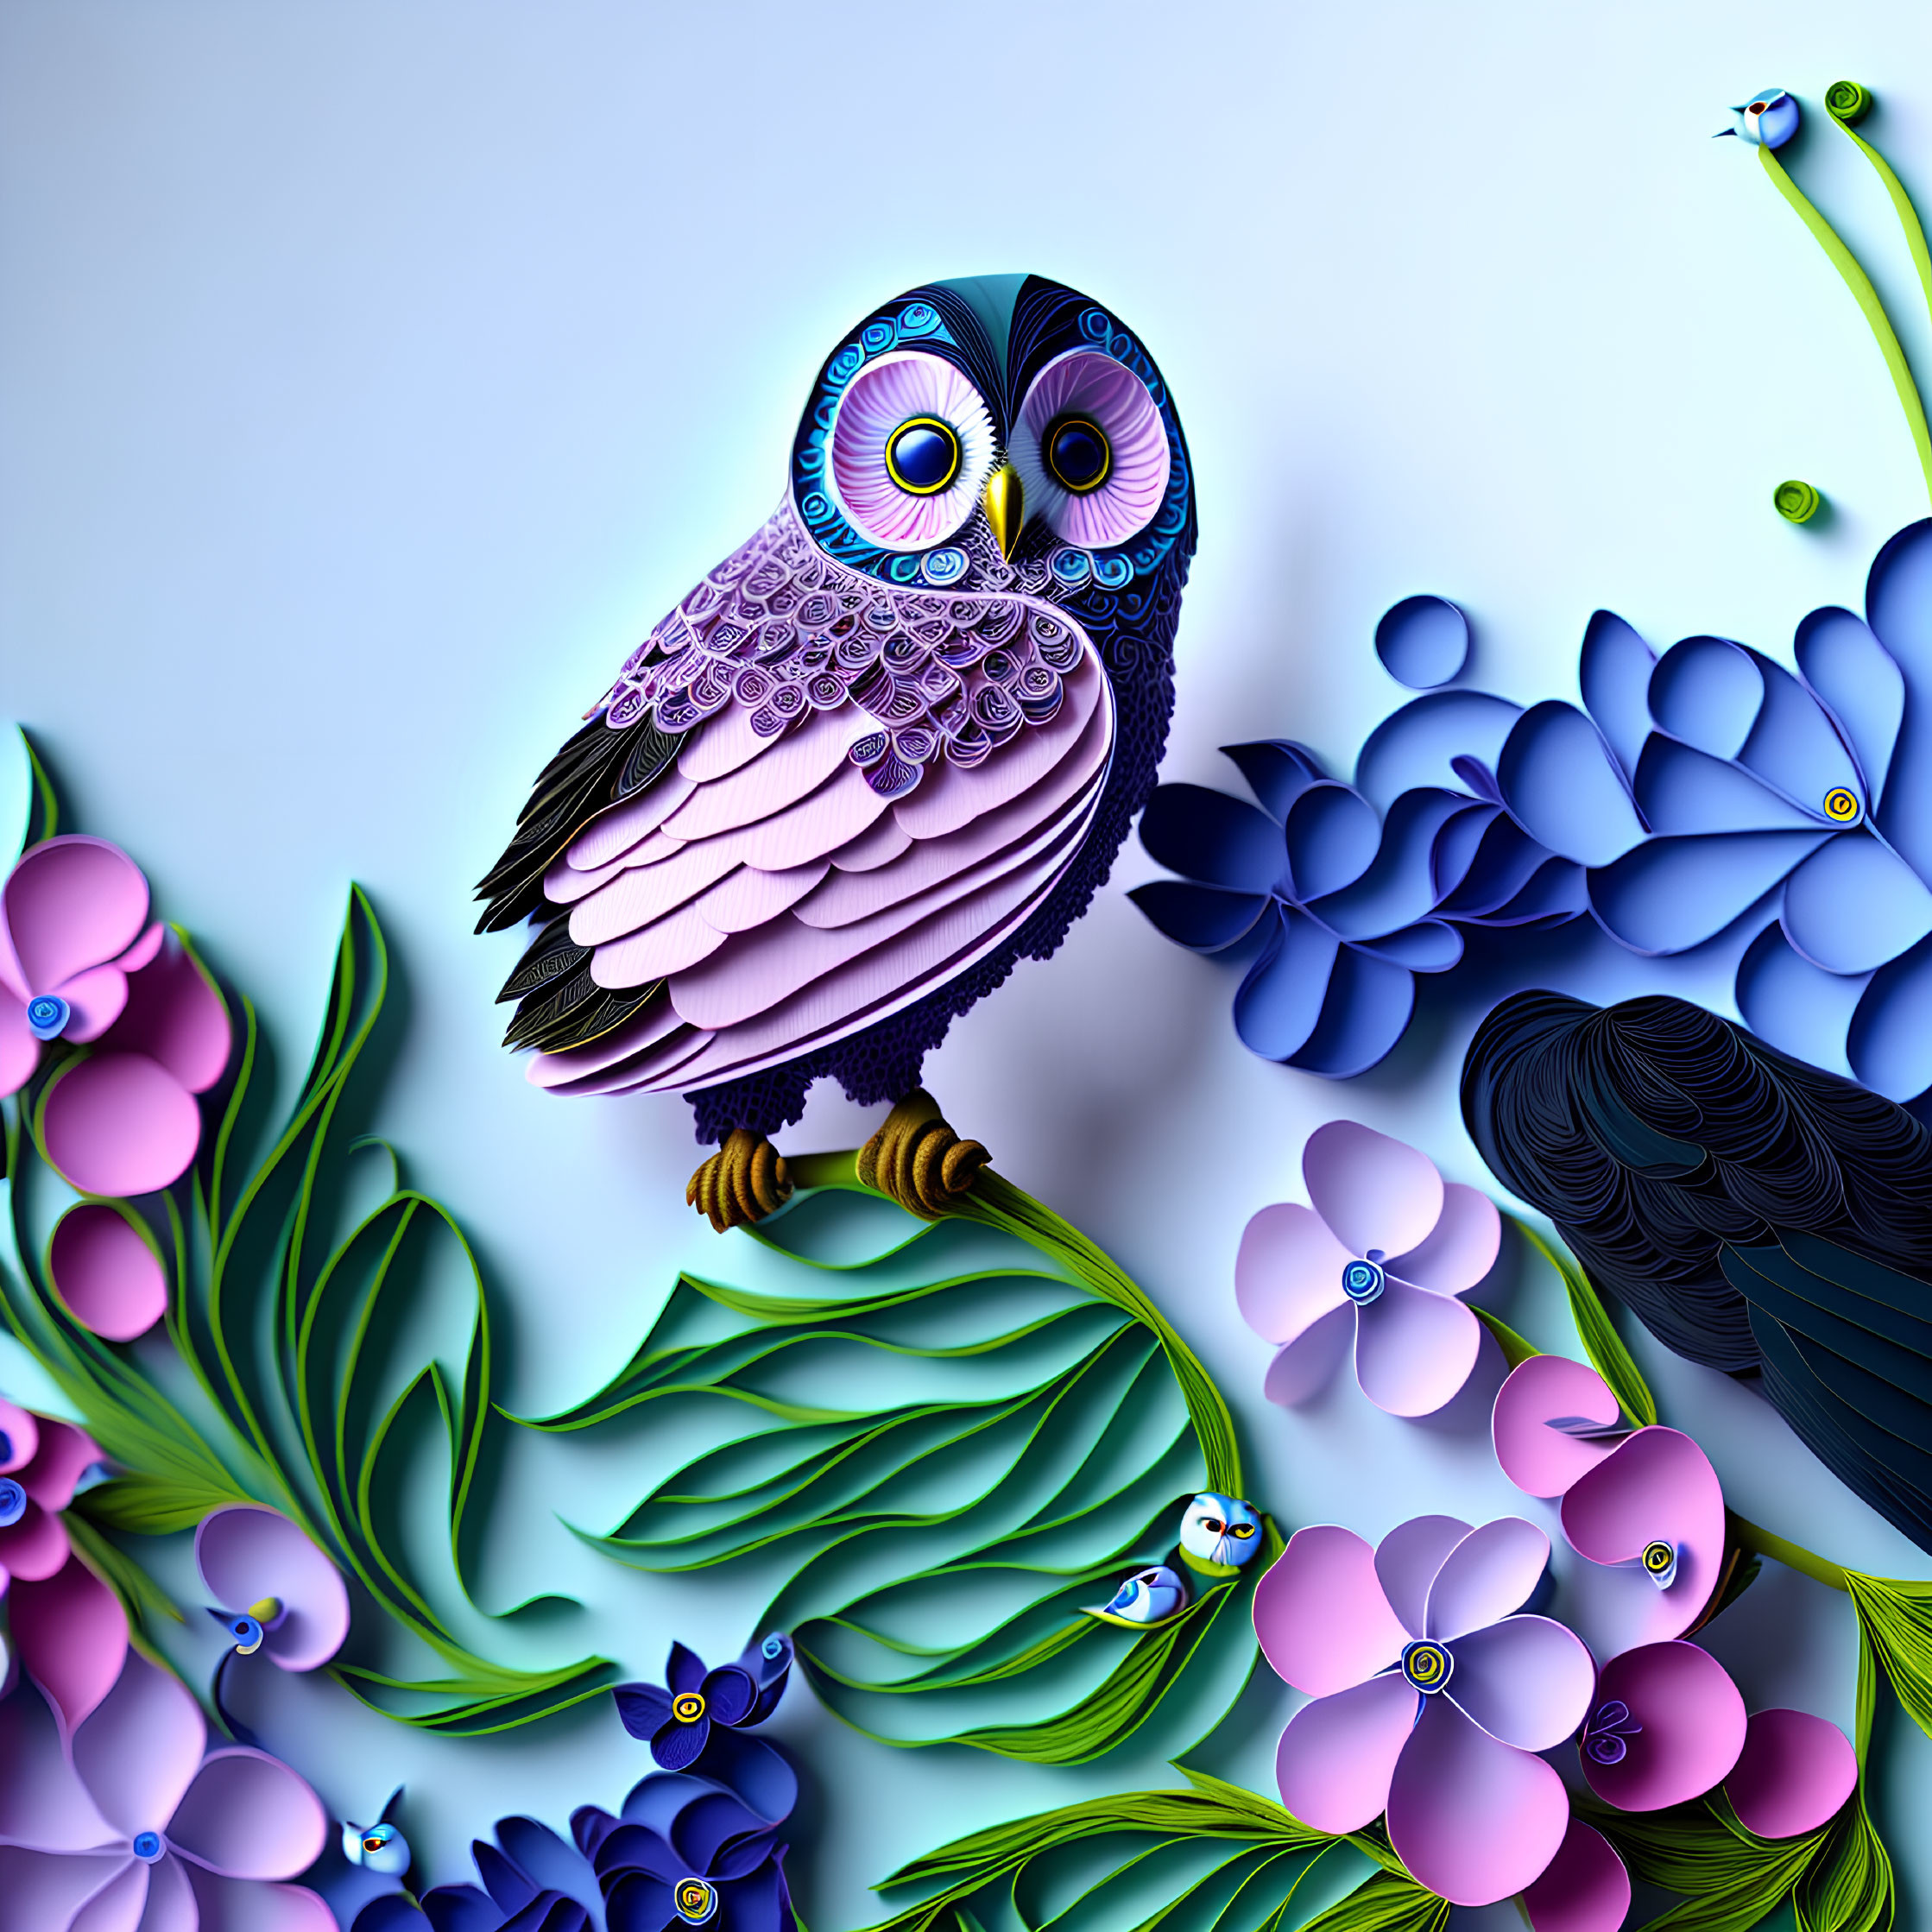 Colorful Owl Art Among Vibrant Paper Flowers on Blue Gradient